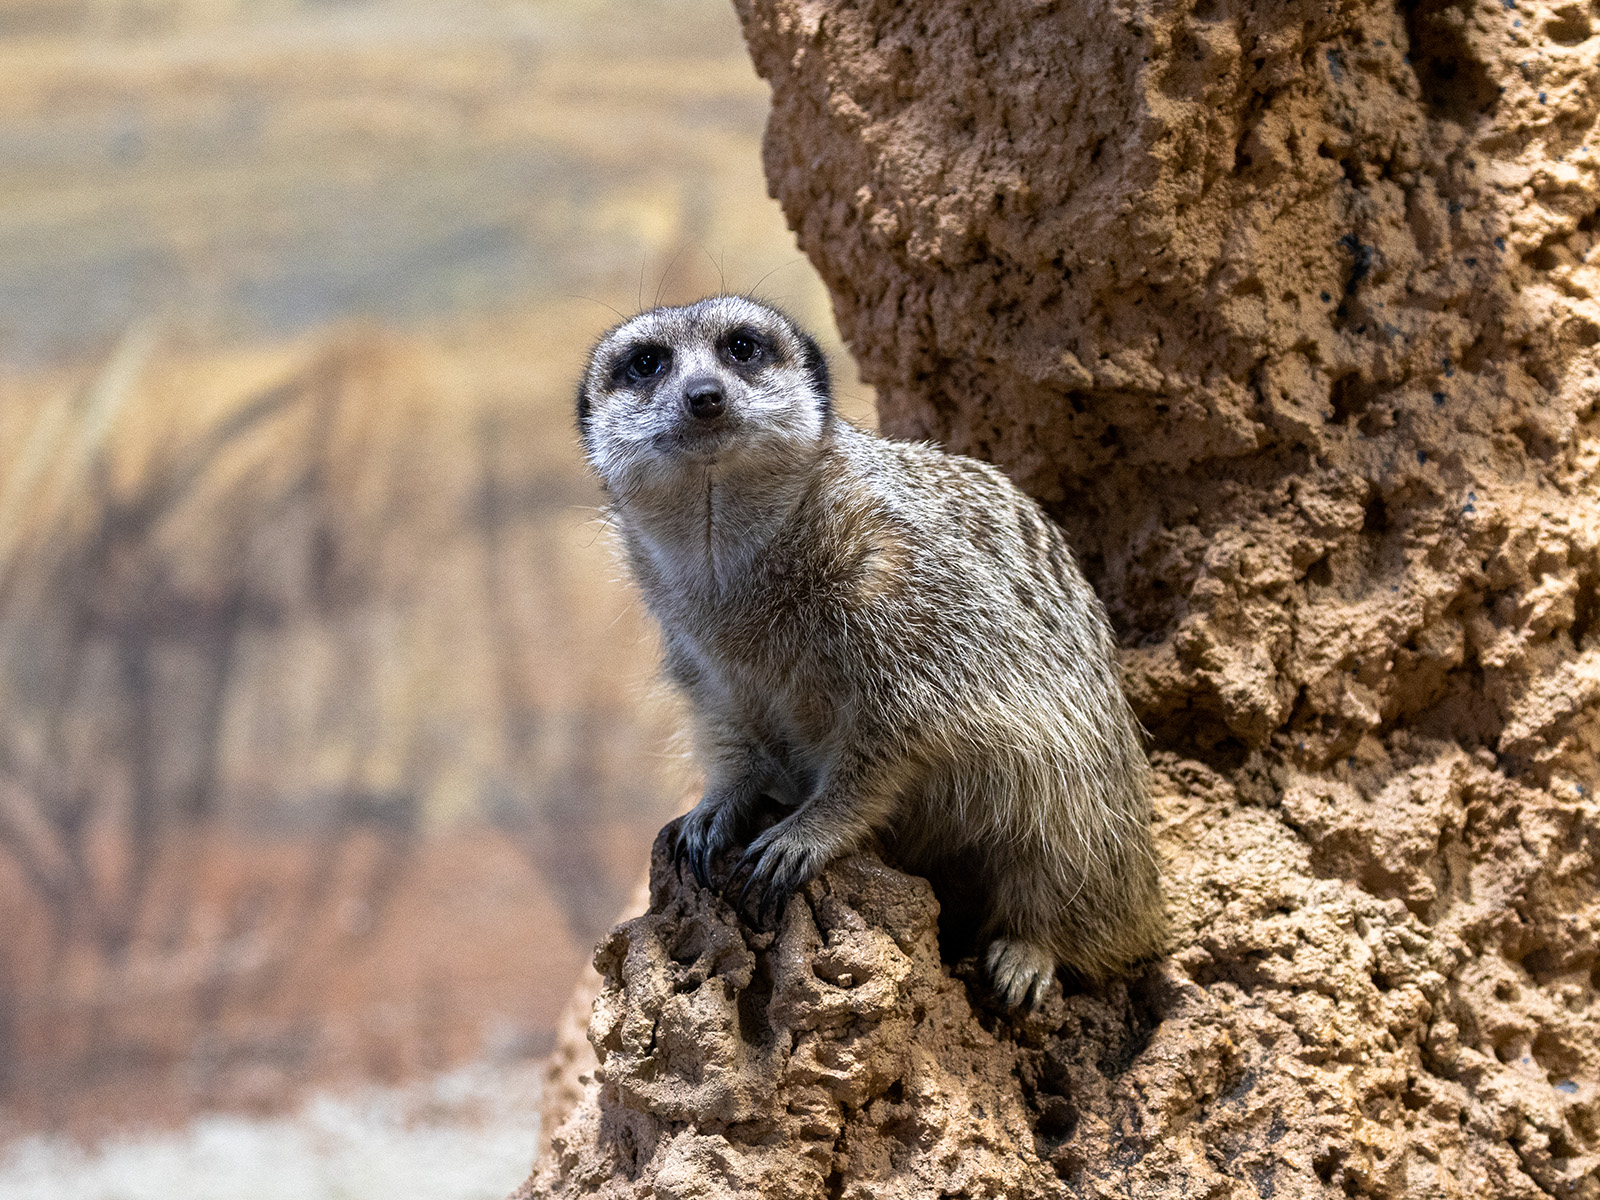 meerkat perched on a rock looks directly to the camera